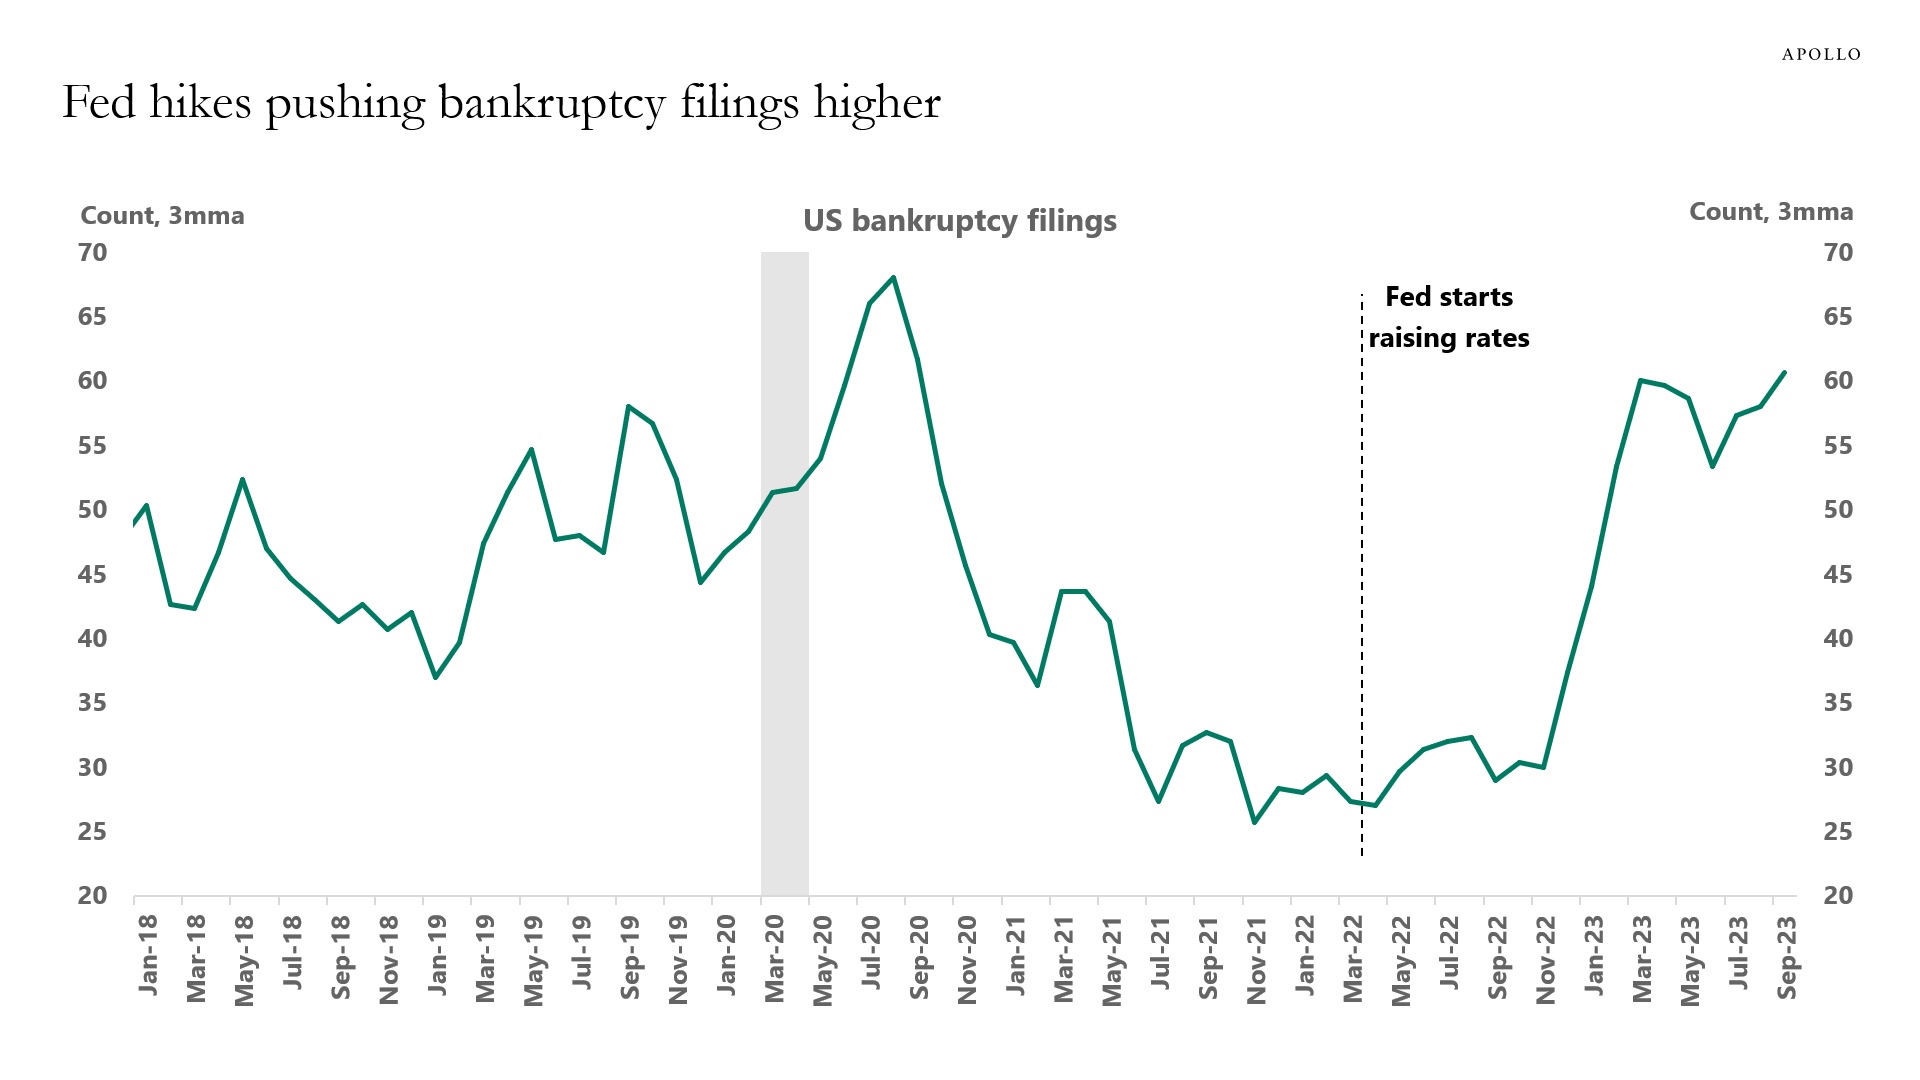 Corporate bankruptcies are rising after the Fed hikes.